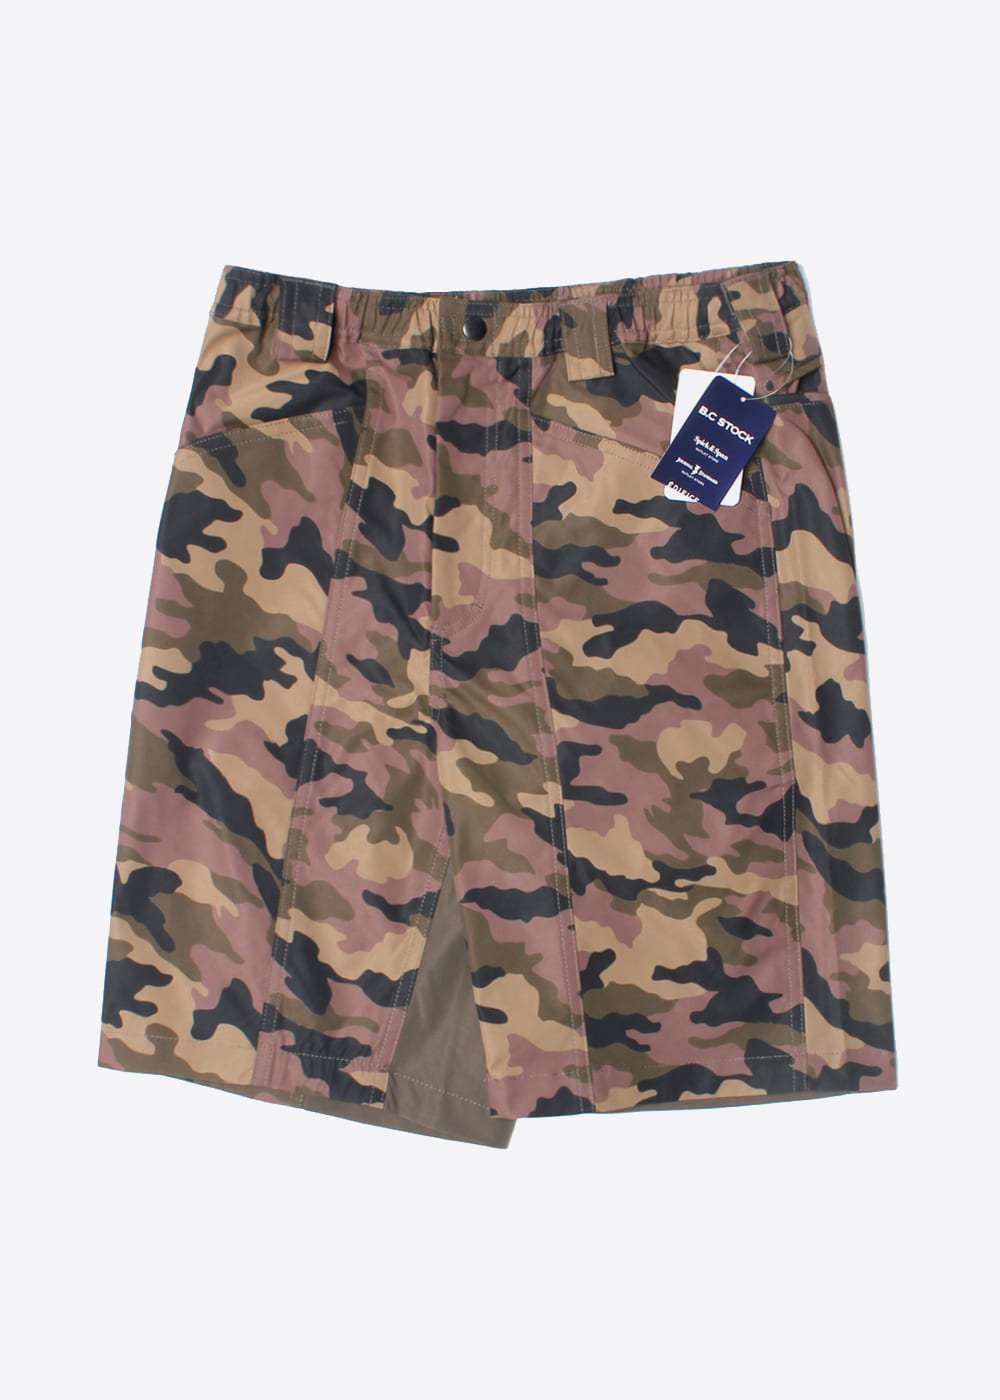 INHERIT BY JOURNAL STANDARD’wide fit’ nylon camouflage shorts